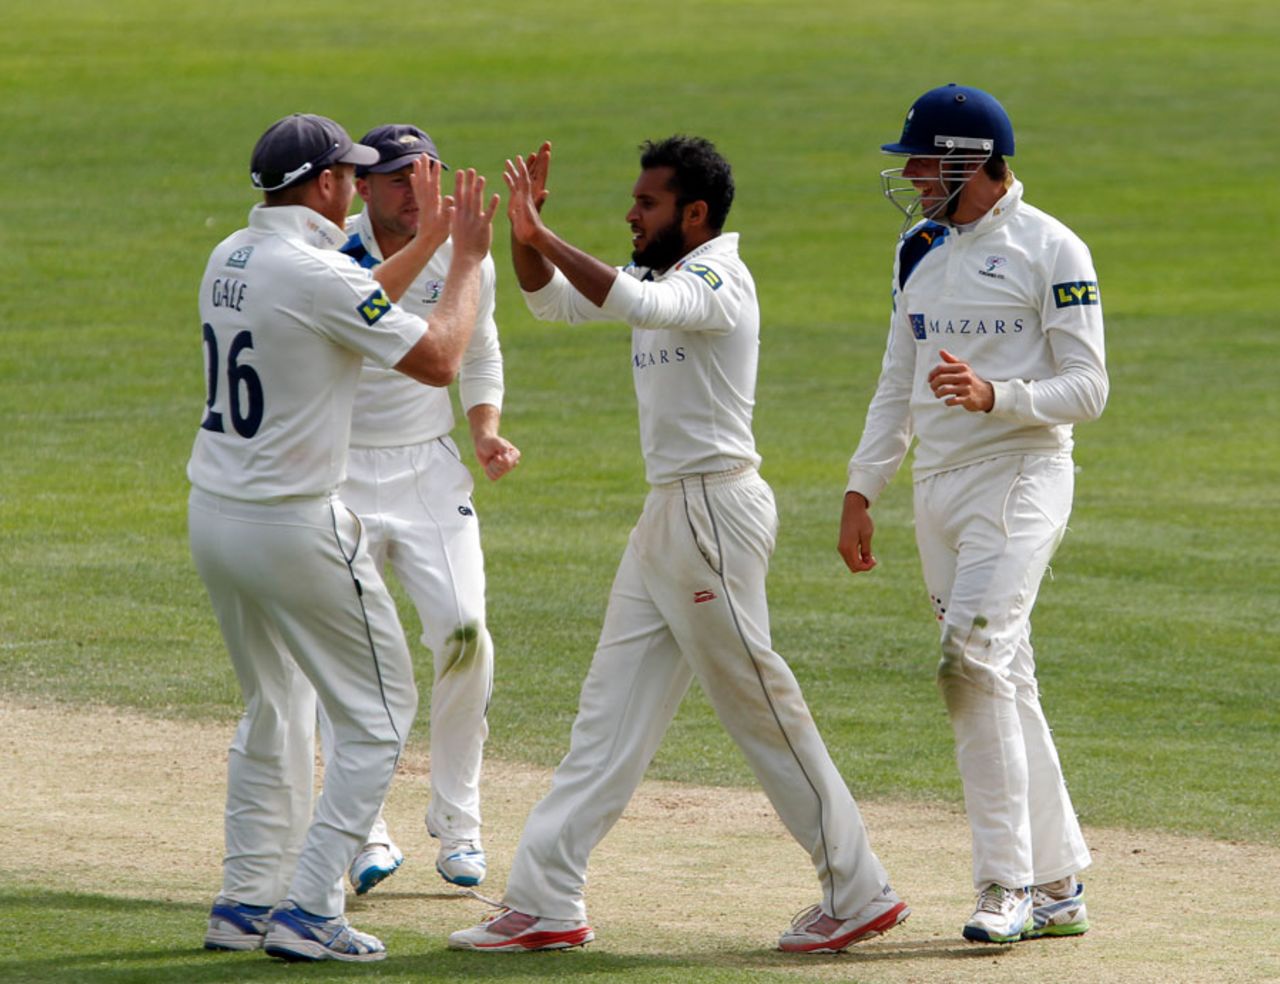 Adil Rashid helped bowl his side to victory with four wickets, Yorkshire v Middlesex, County Championship, Division One, Scarborough, 4th day, July 22, 2014